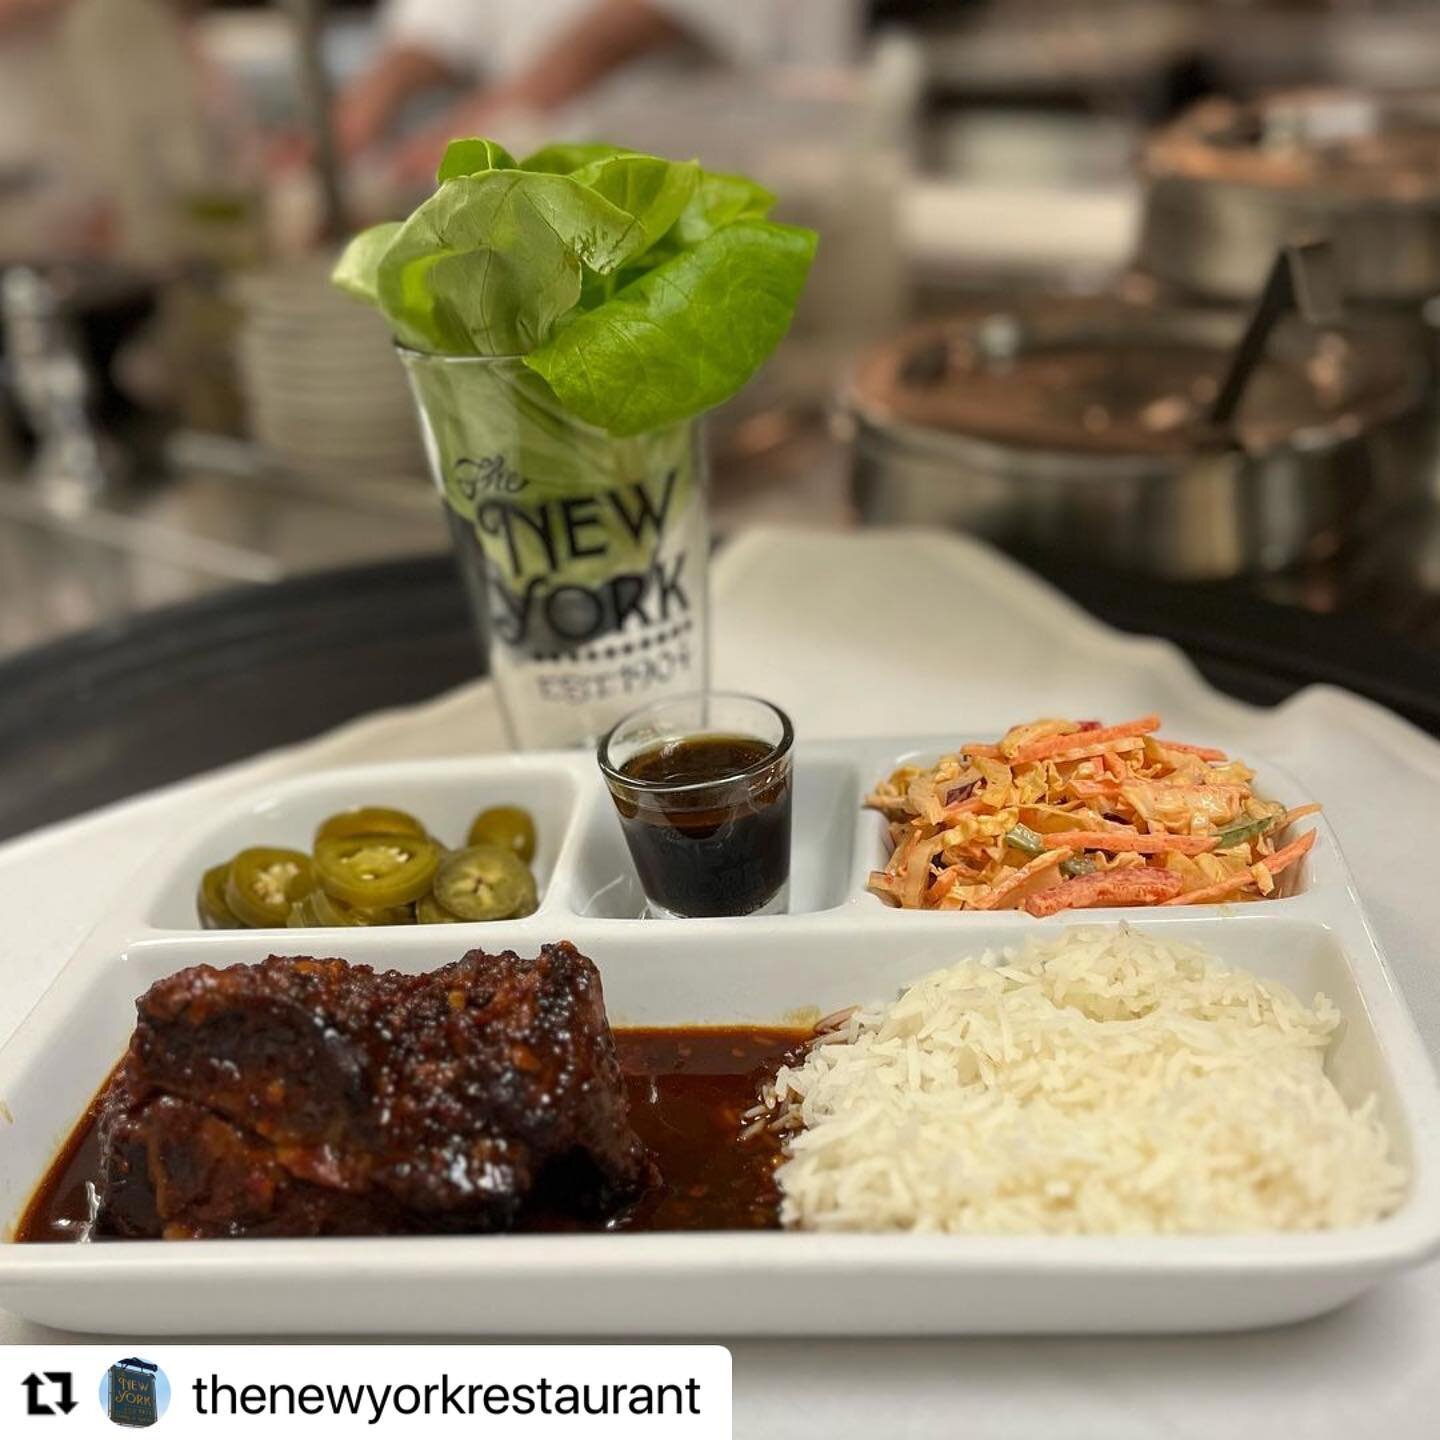 Restaurant Week is HERE!

Bo Ssam will be on the menu this evening. Start with a Lettuce Wrap and pile on some Slow-roasted Pork, Basmati Rice, Sriracha Slaw, Pickled Jalepenos and top with a Sesame Soy Sauce. Bo Ssam is the perfect blend of freshnes